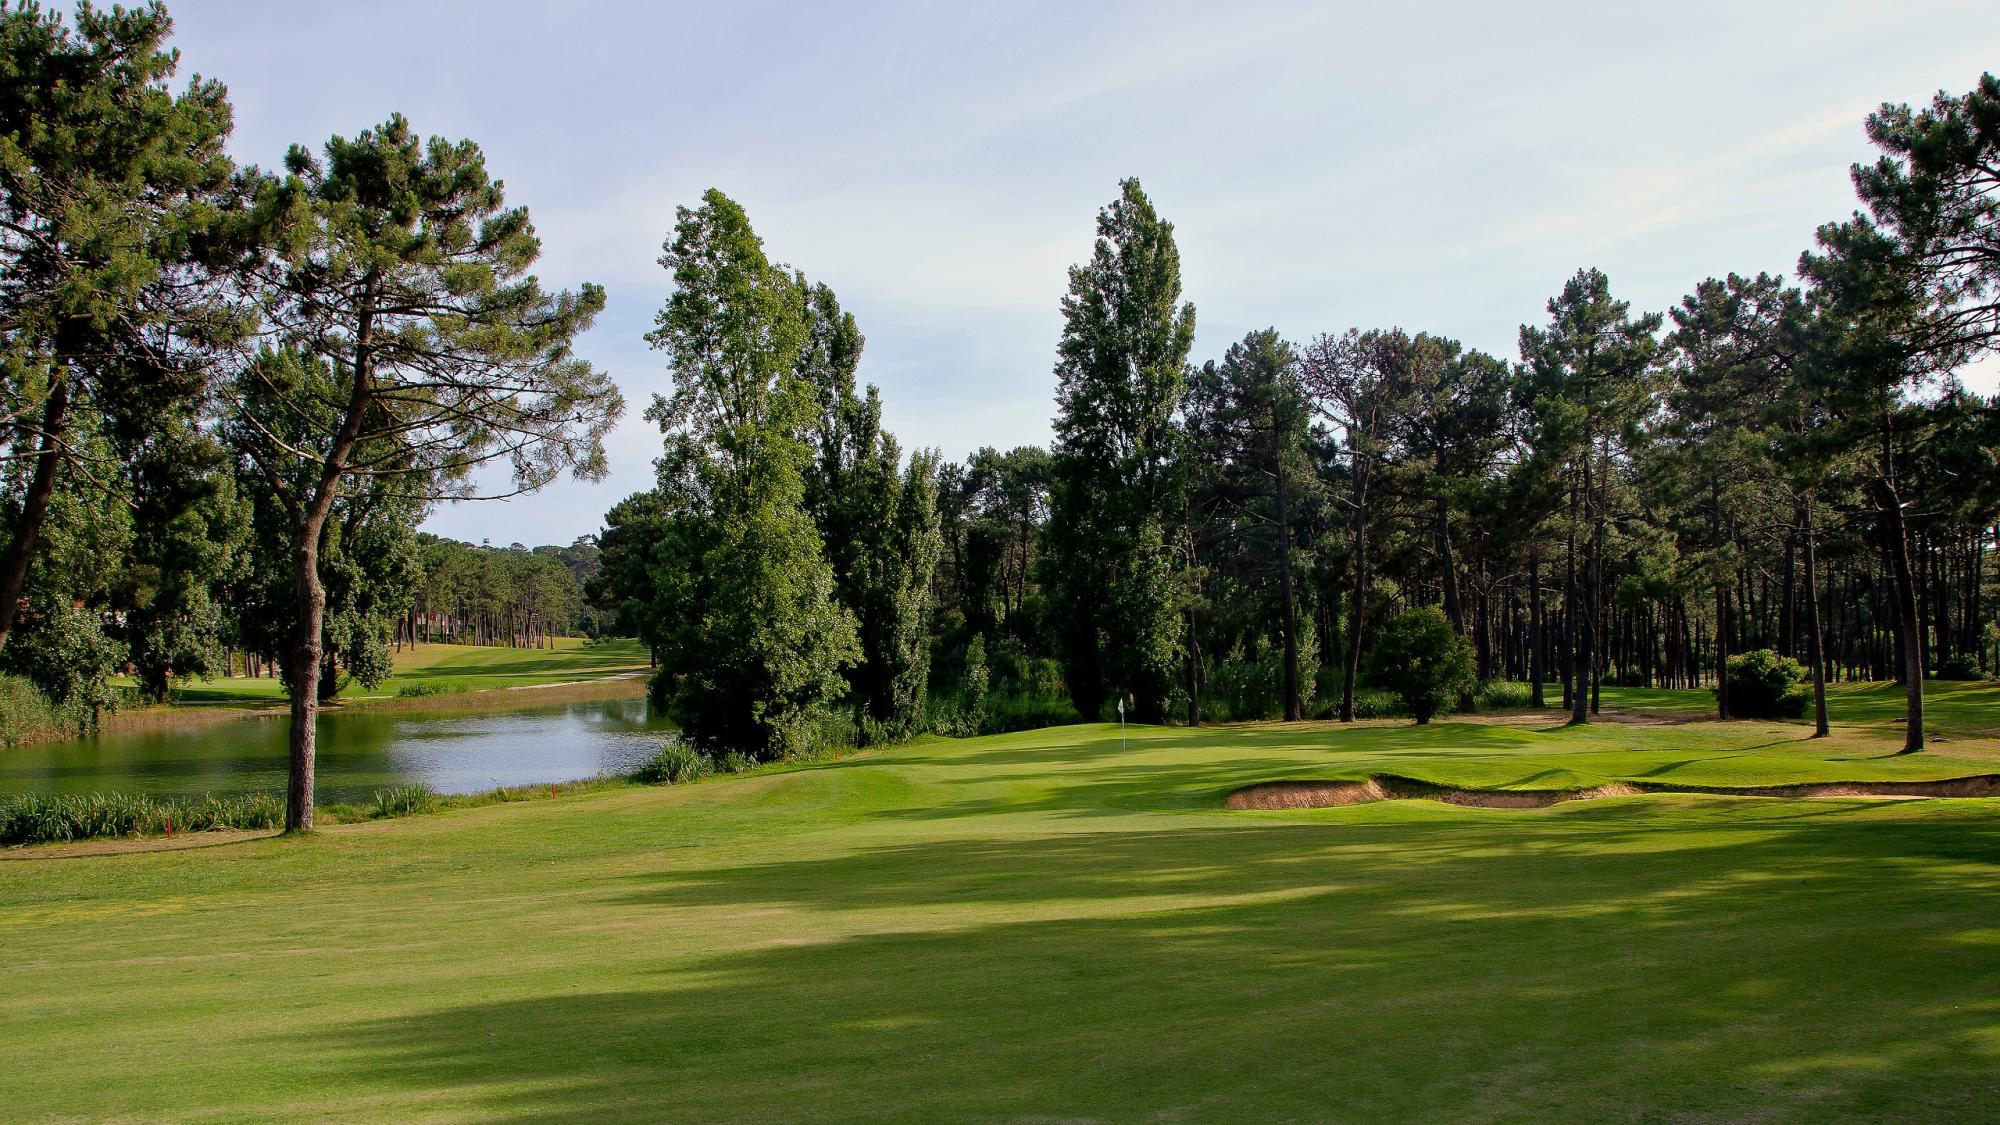 The Aroeira 2 Golf Course's scenic golf course within marvelous Lisbon.